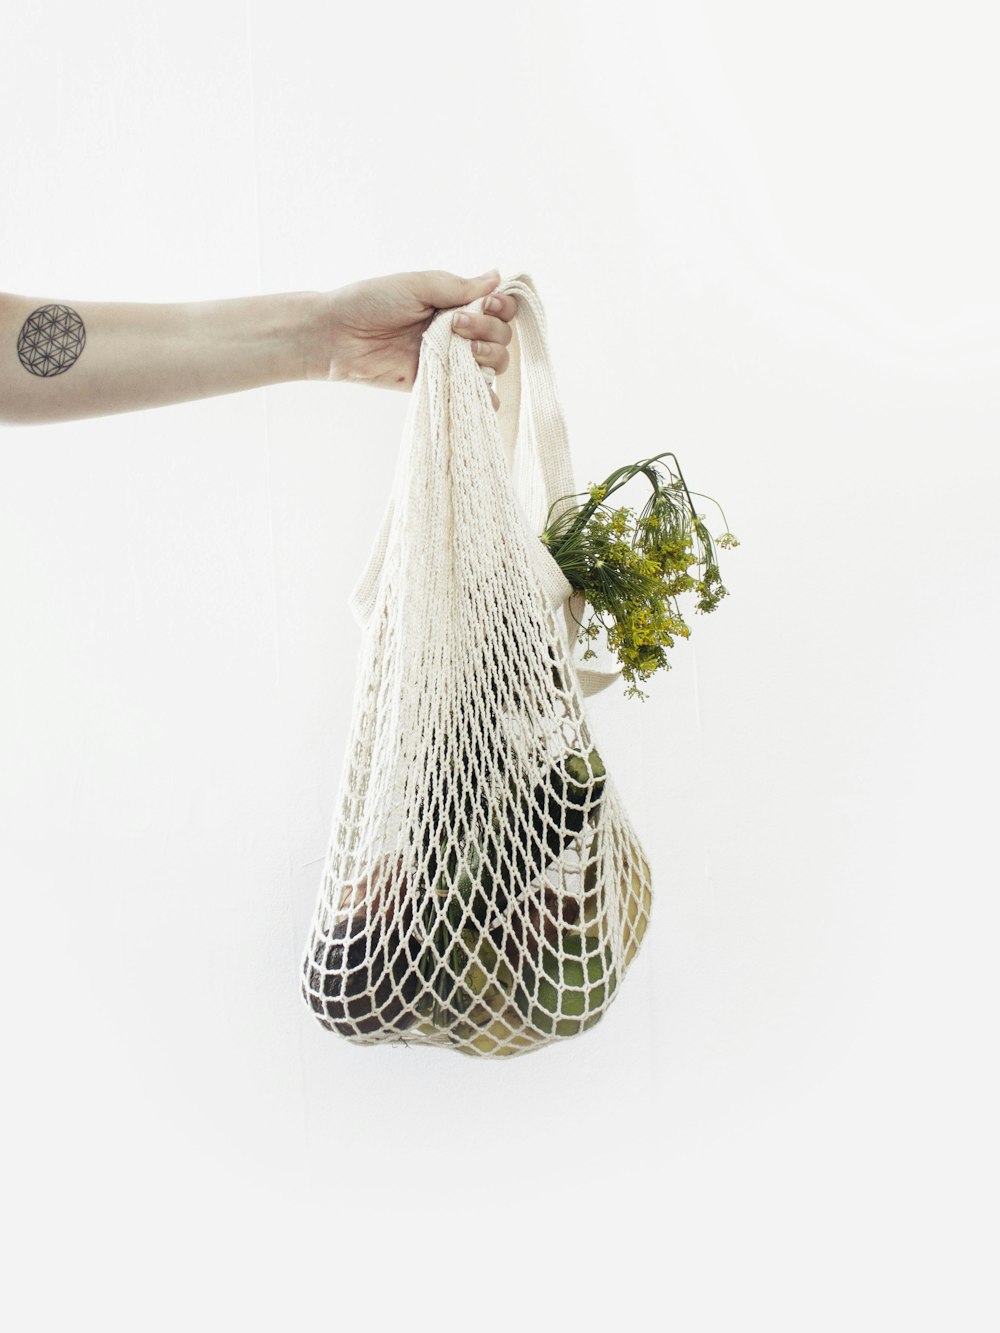 person holding white net with vegetable